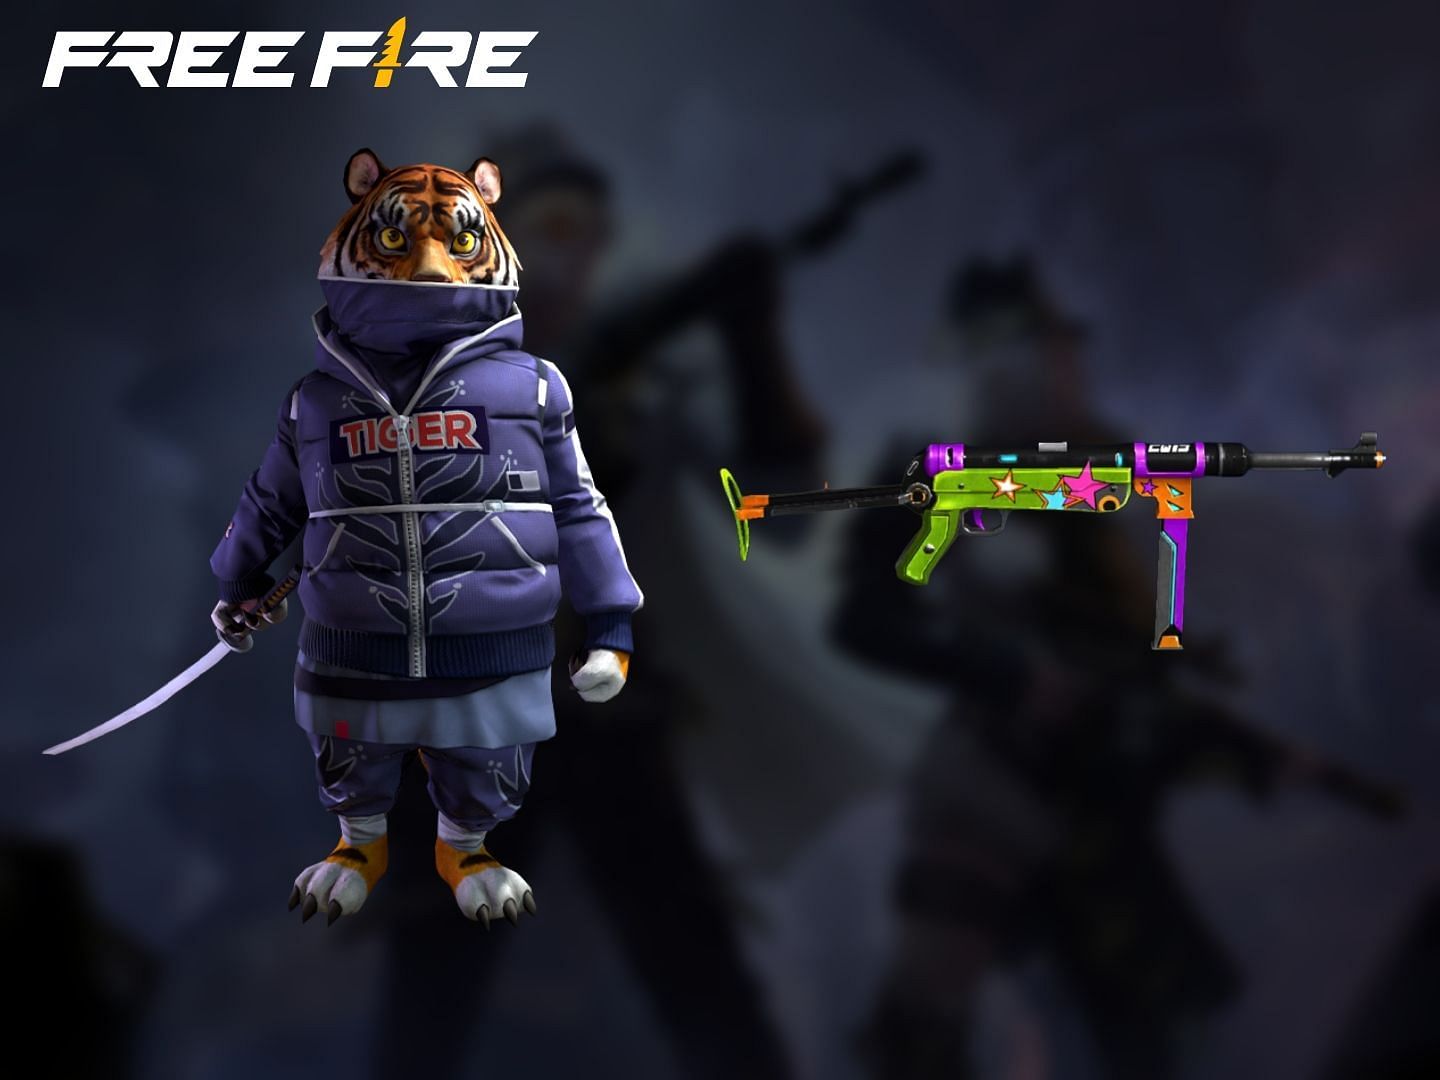 You can get free pets and gun skins through the Free Fire redeem codes (Image via Garena)